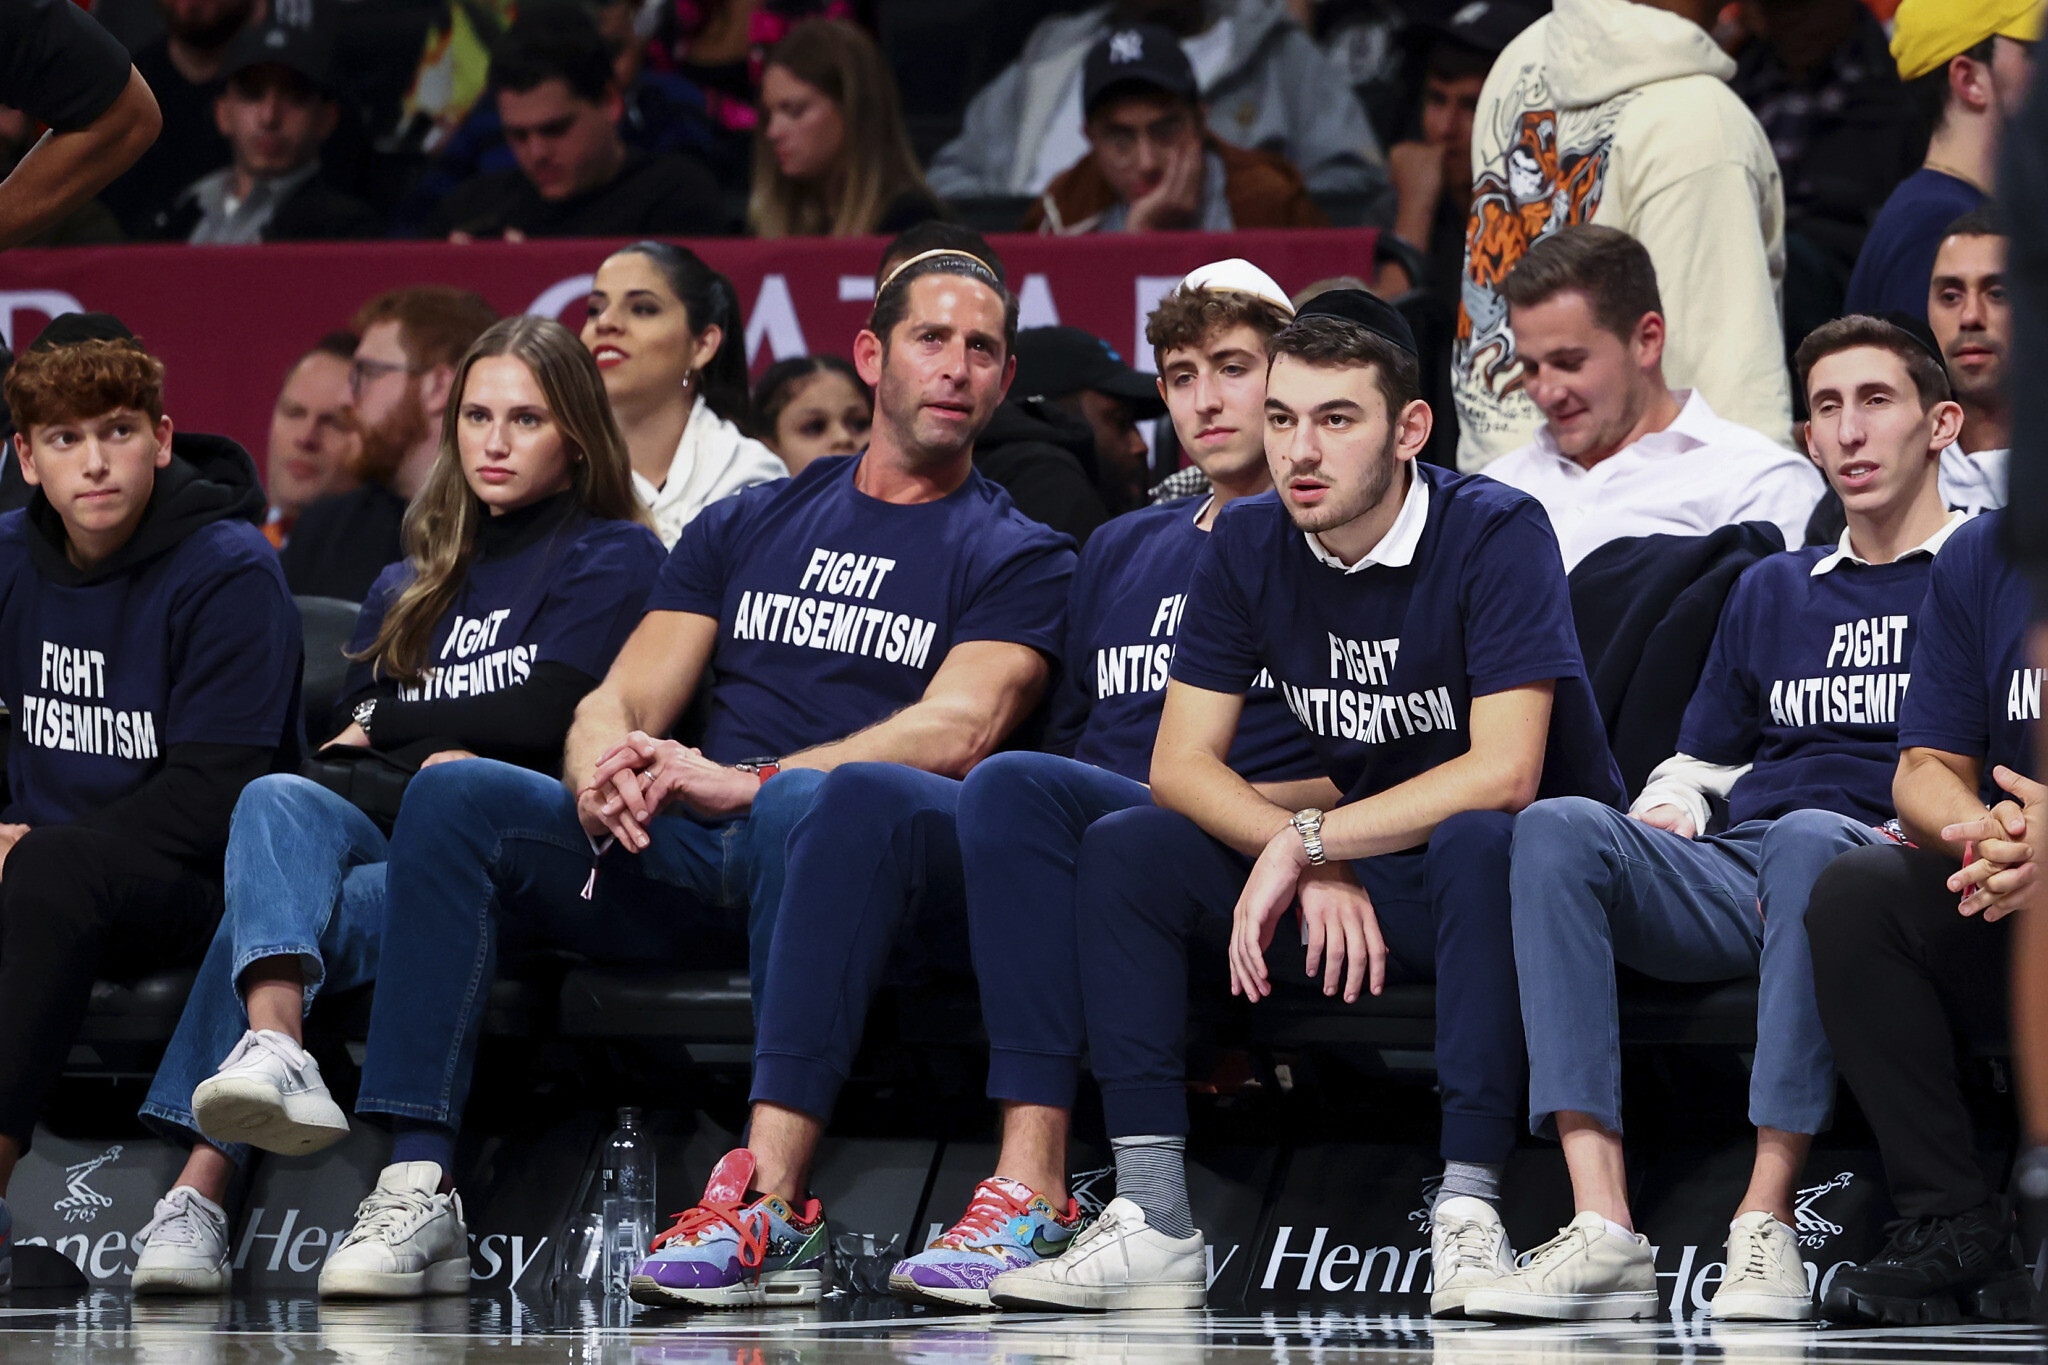 Courtside NBA fans wear 'fight antisemitism' shirts at Kyrie Irving game